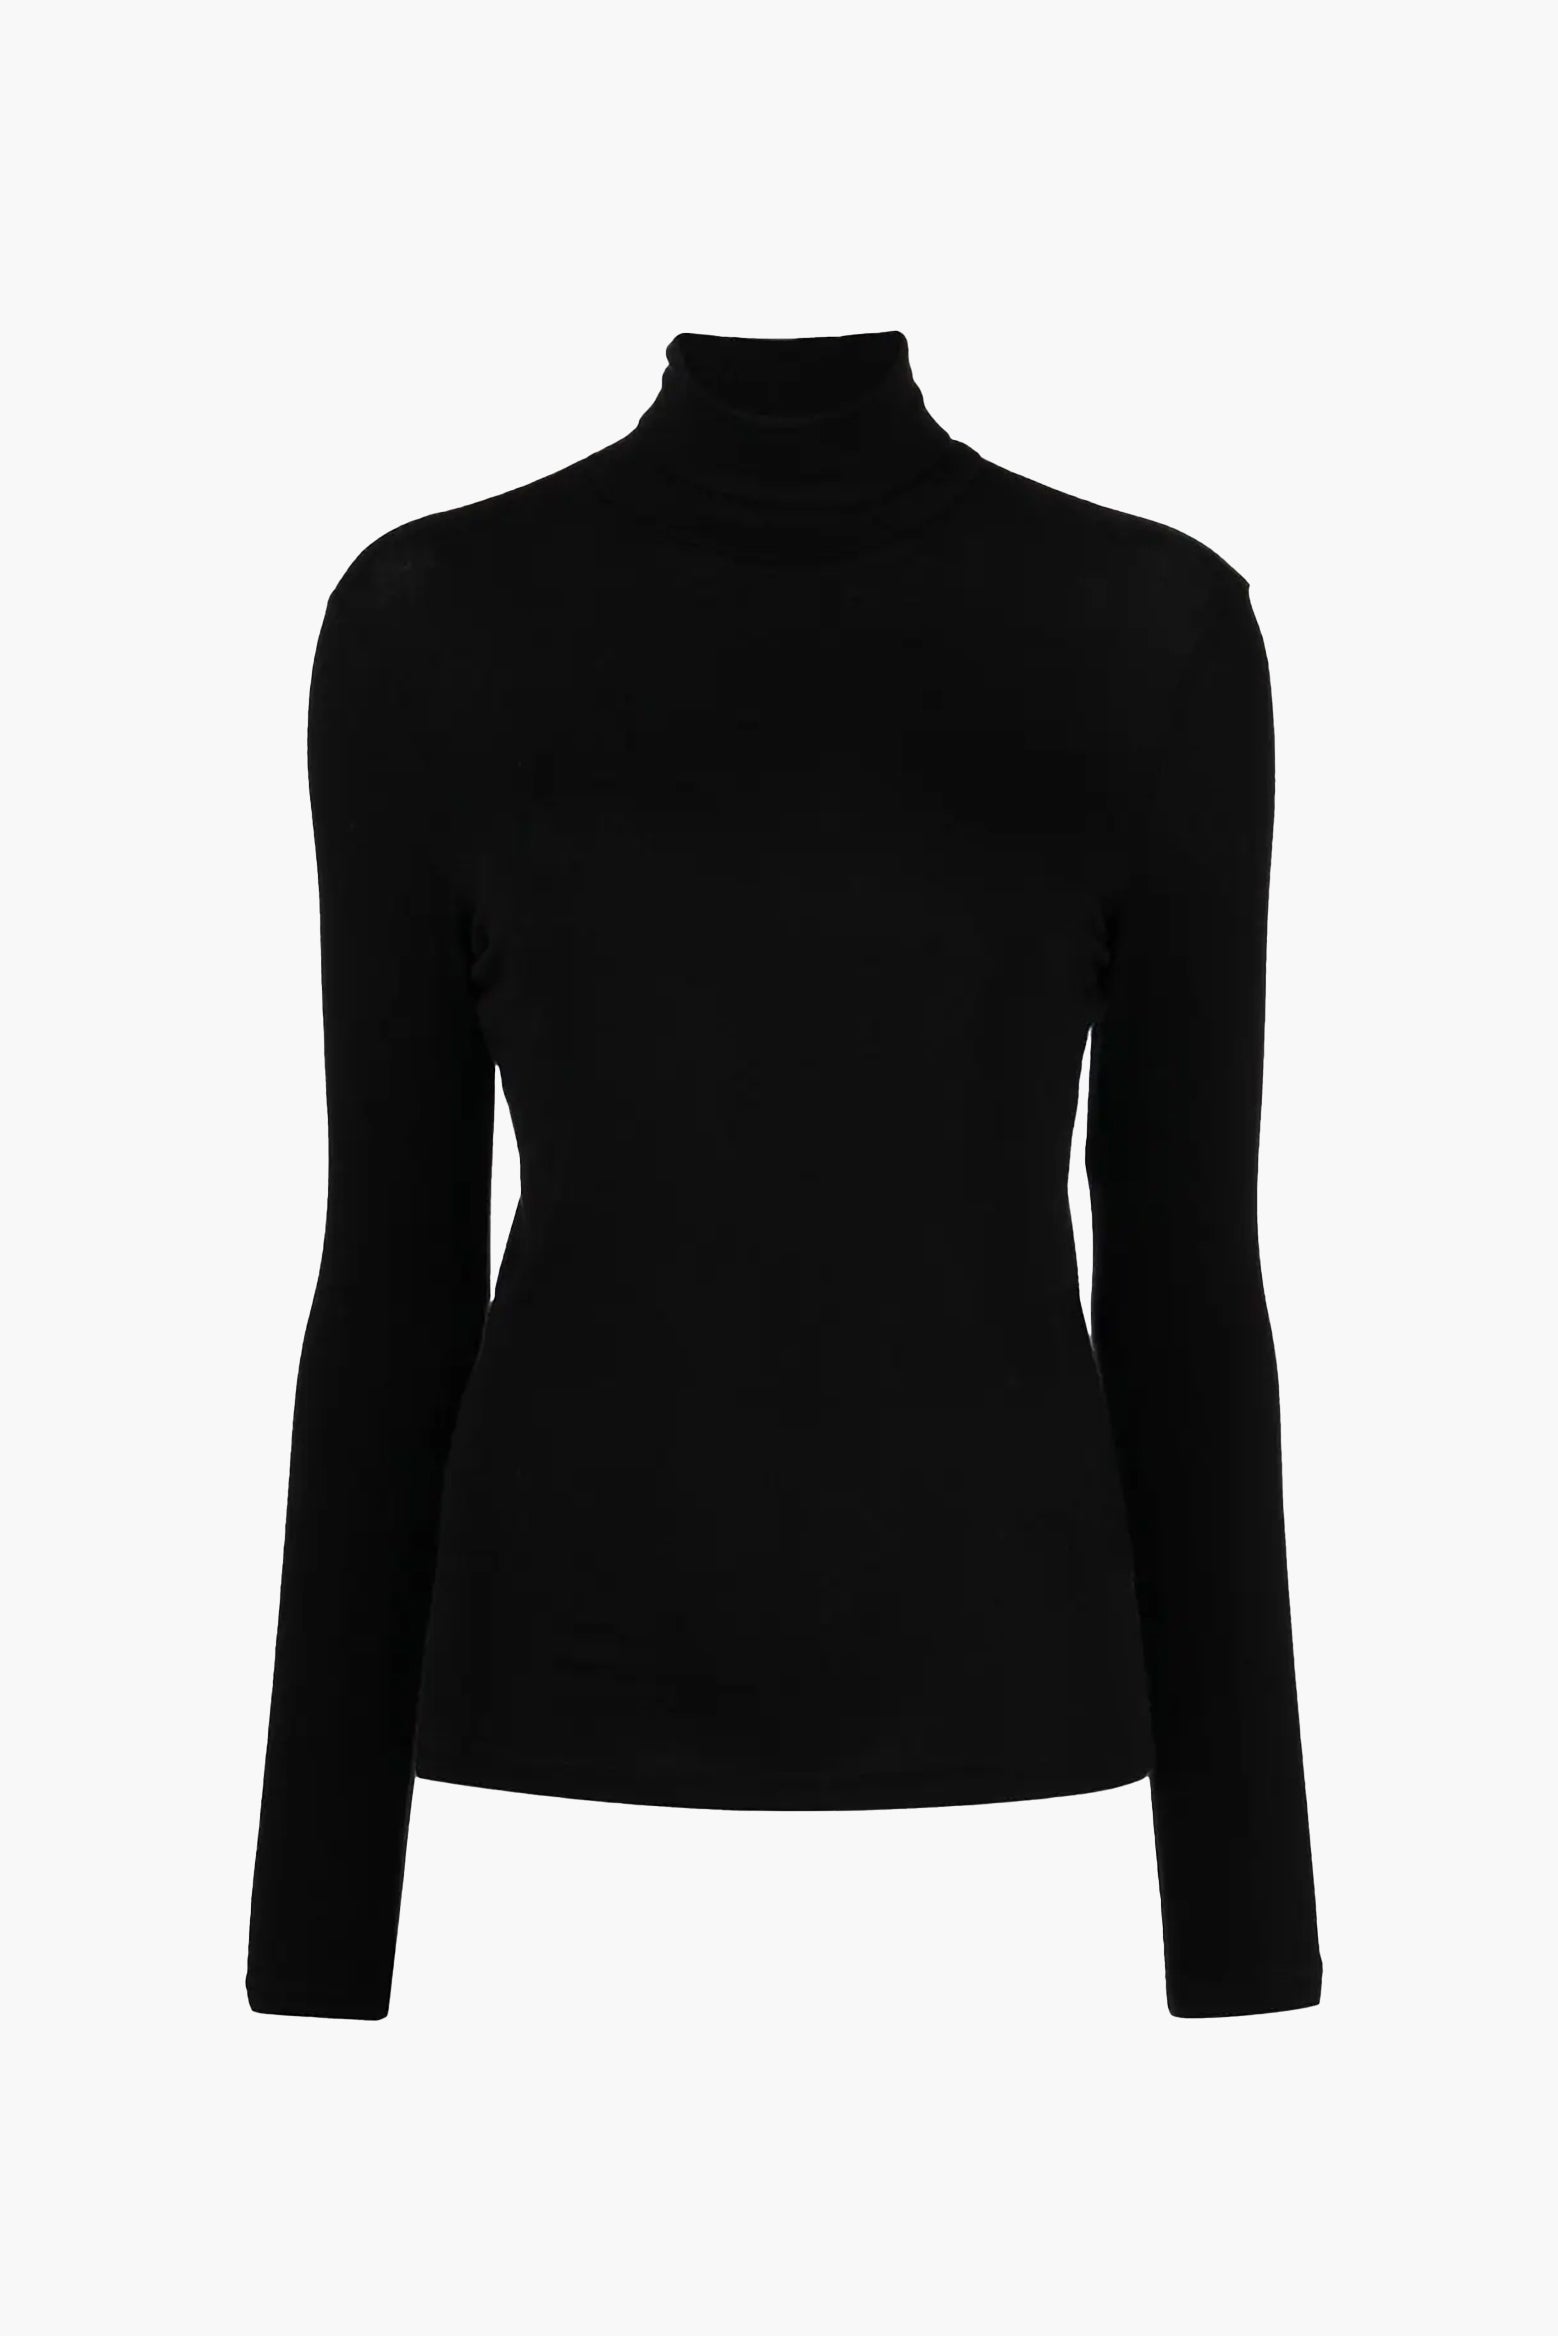 AGOLDE Pascale Turtleneck in Black available at The New Trend Australia